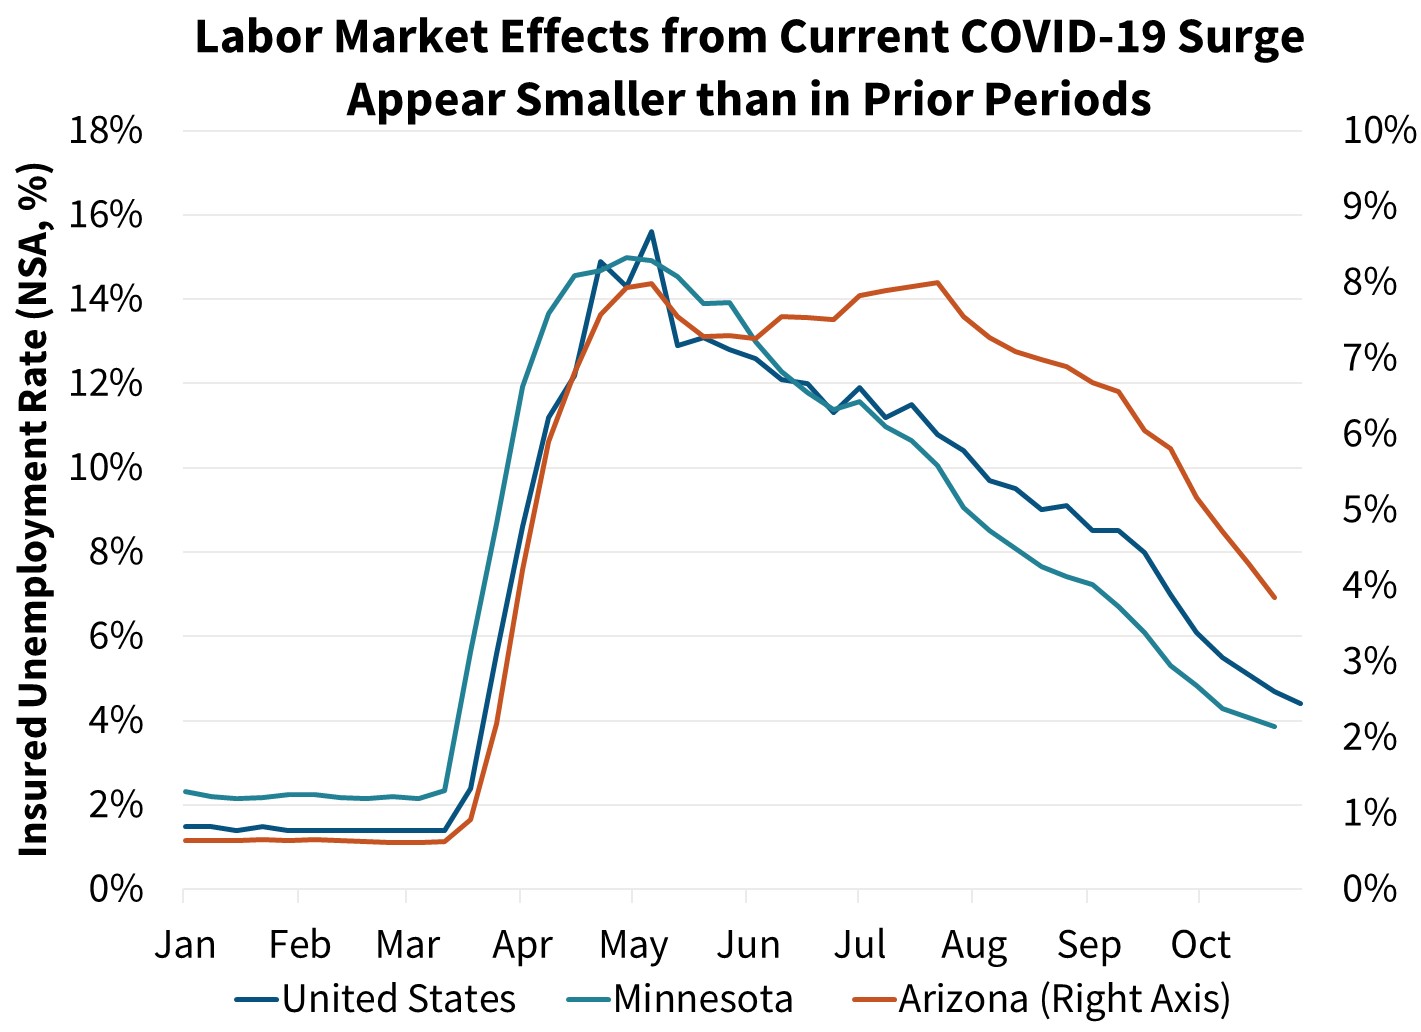  Labor Market Effects form Current COVID-19 Surge Appear Smaller than in Prior Periods
 